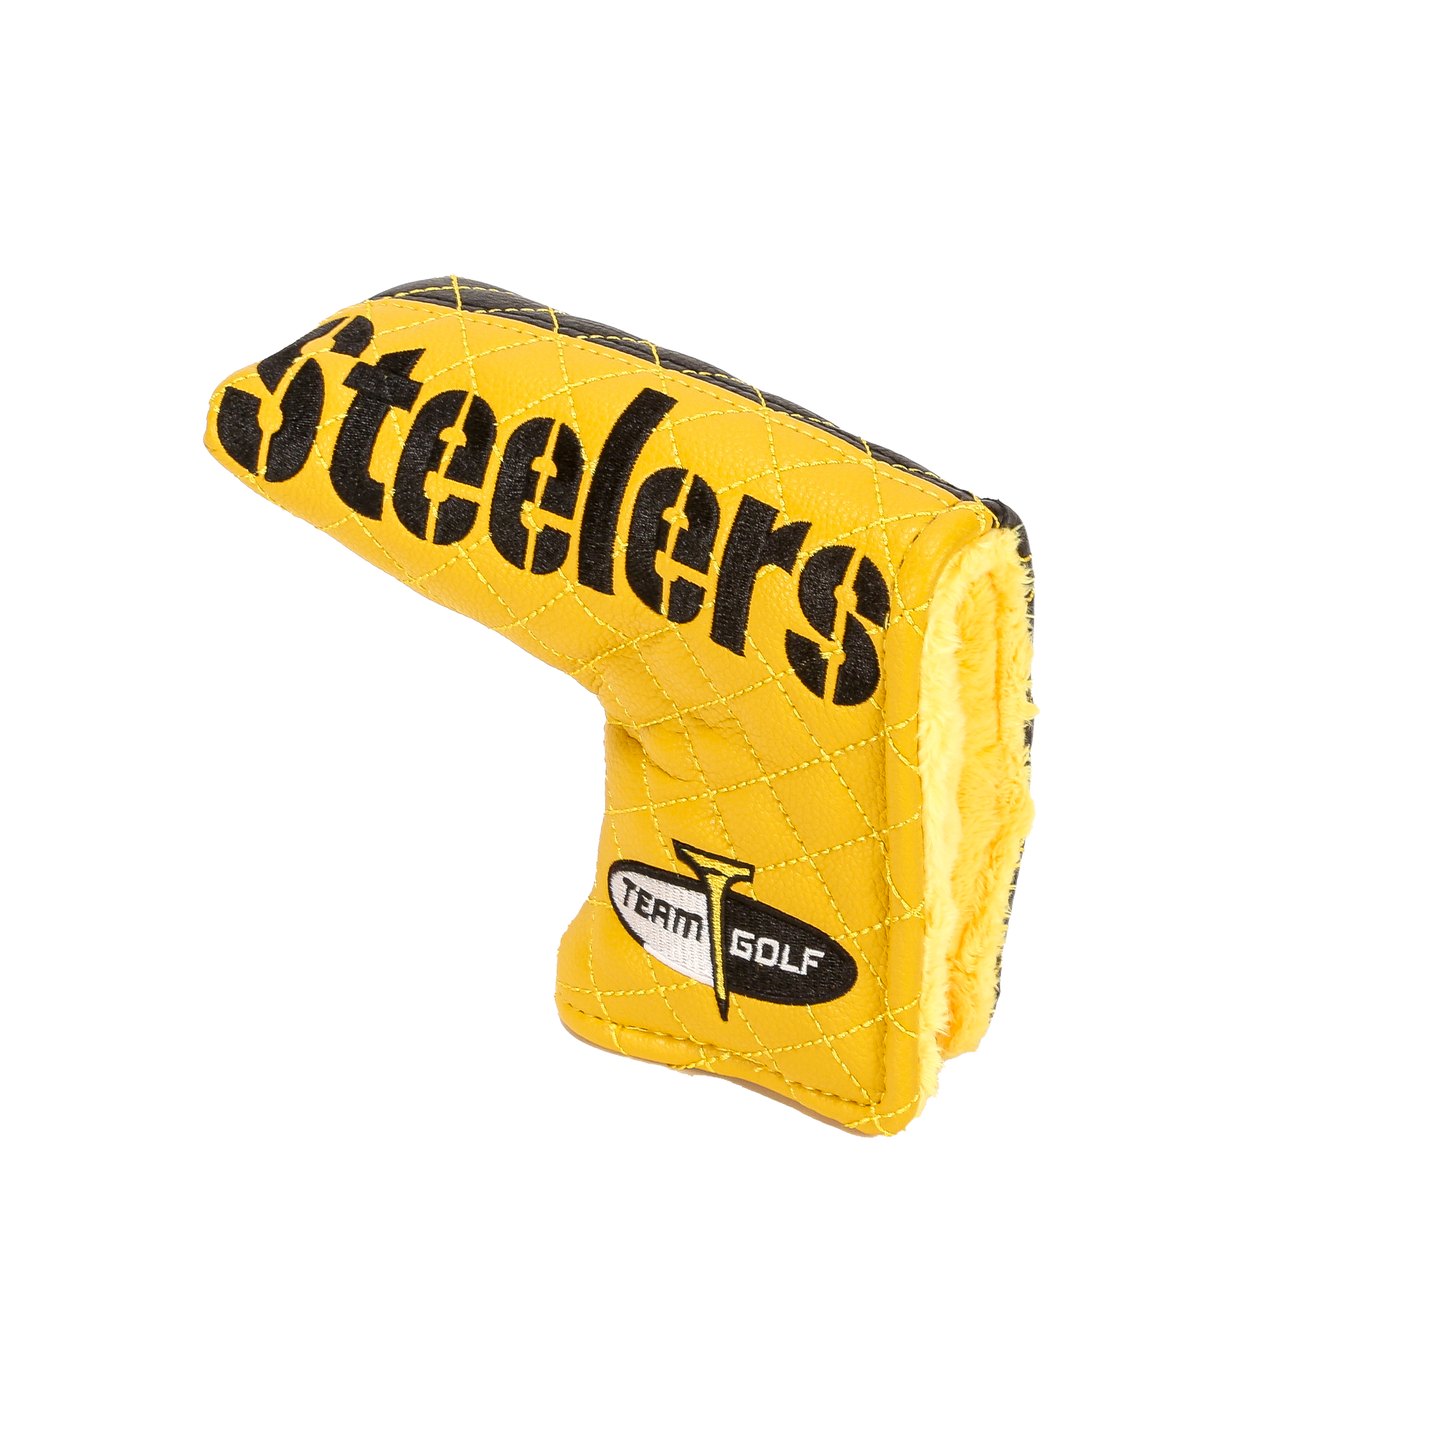 Pittsburgh "Steelers" Blade Putter Cover